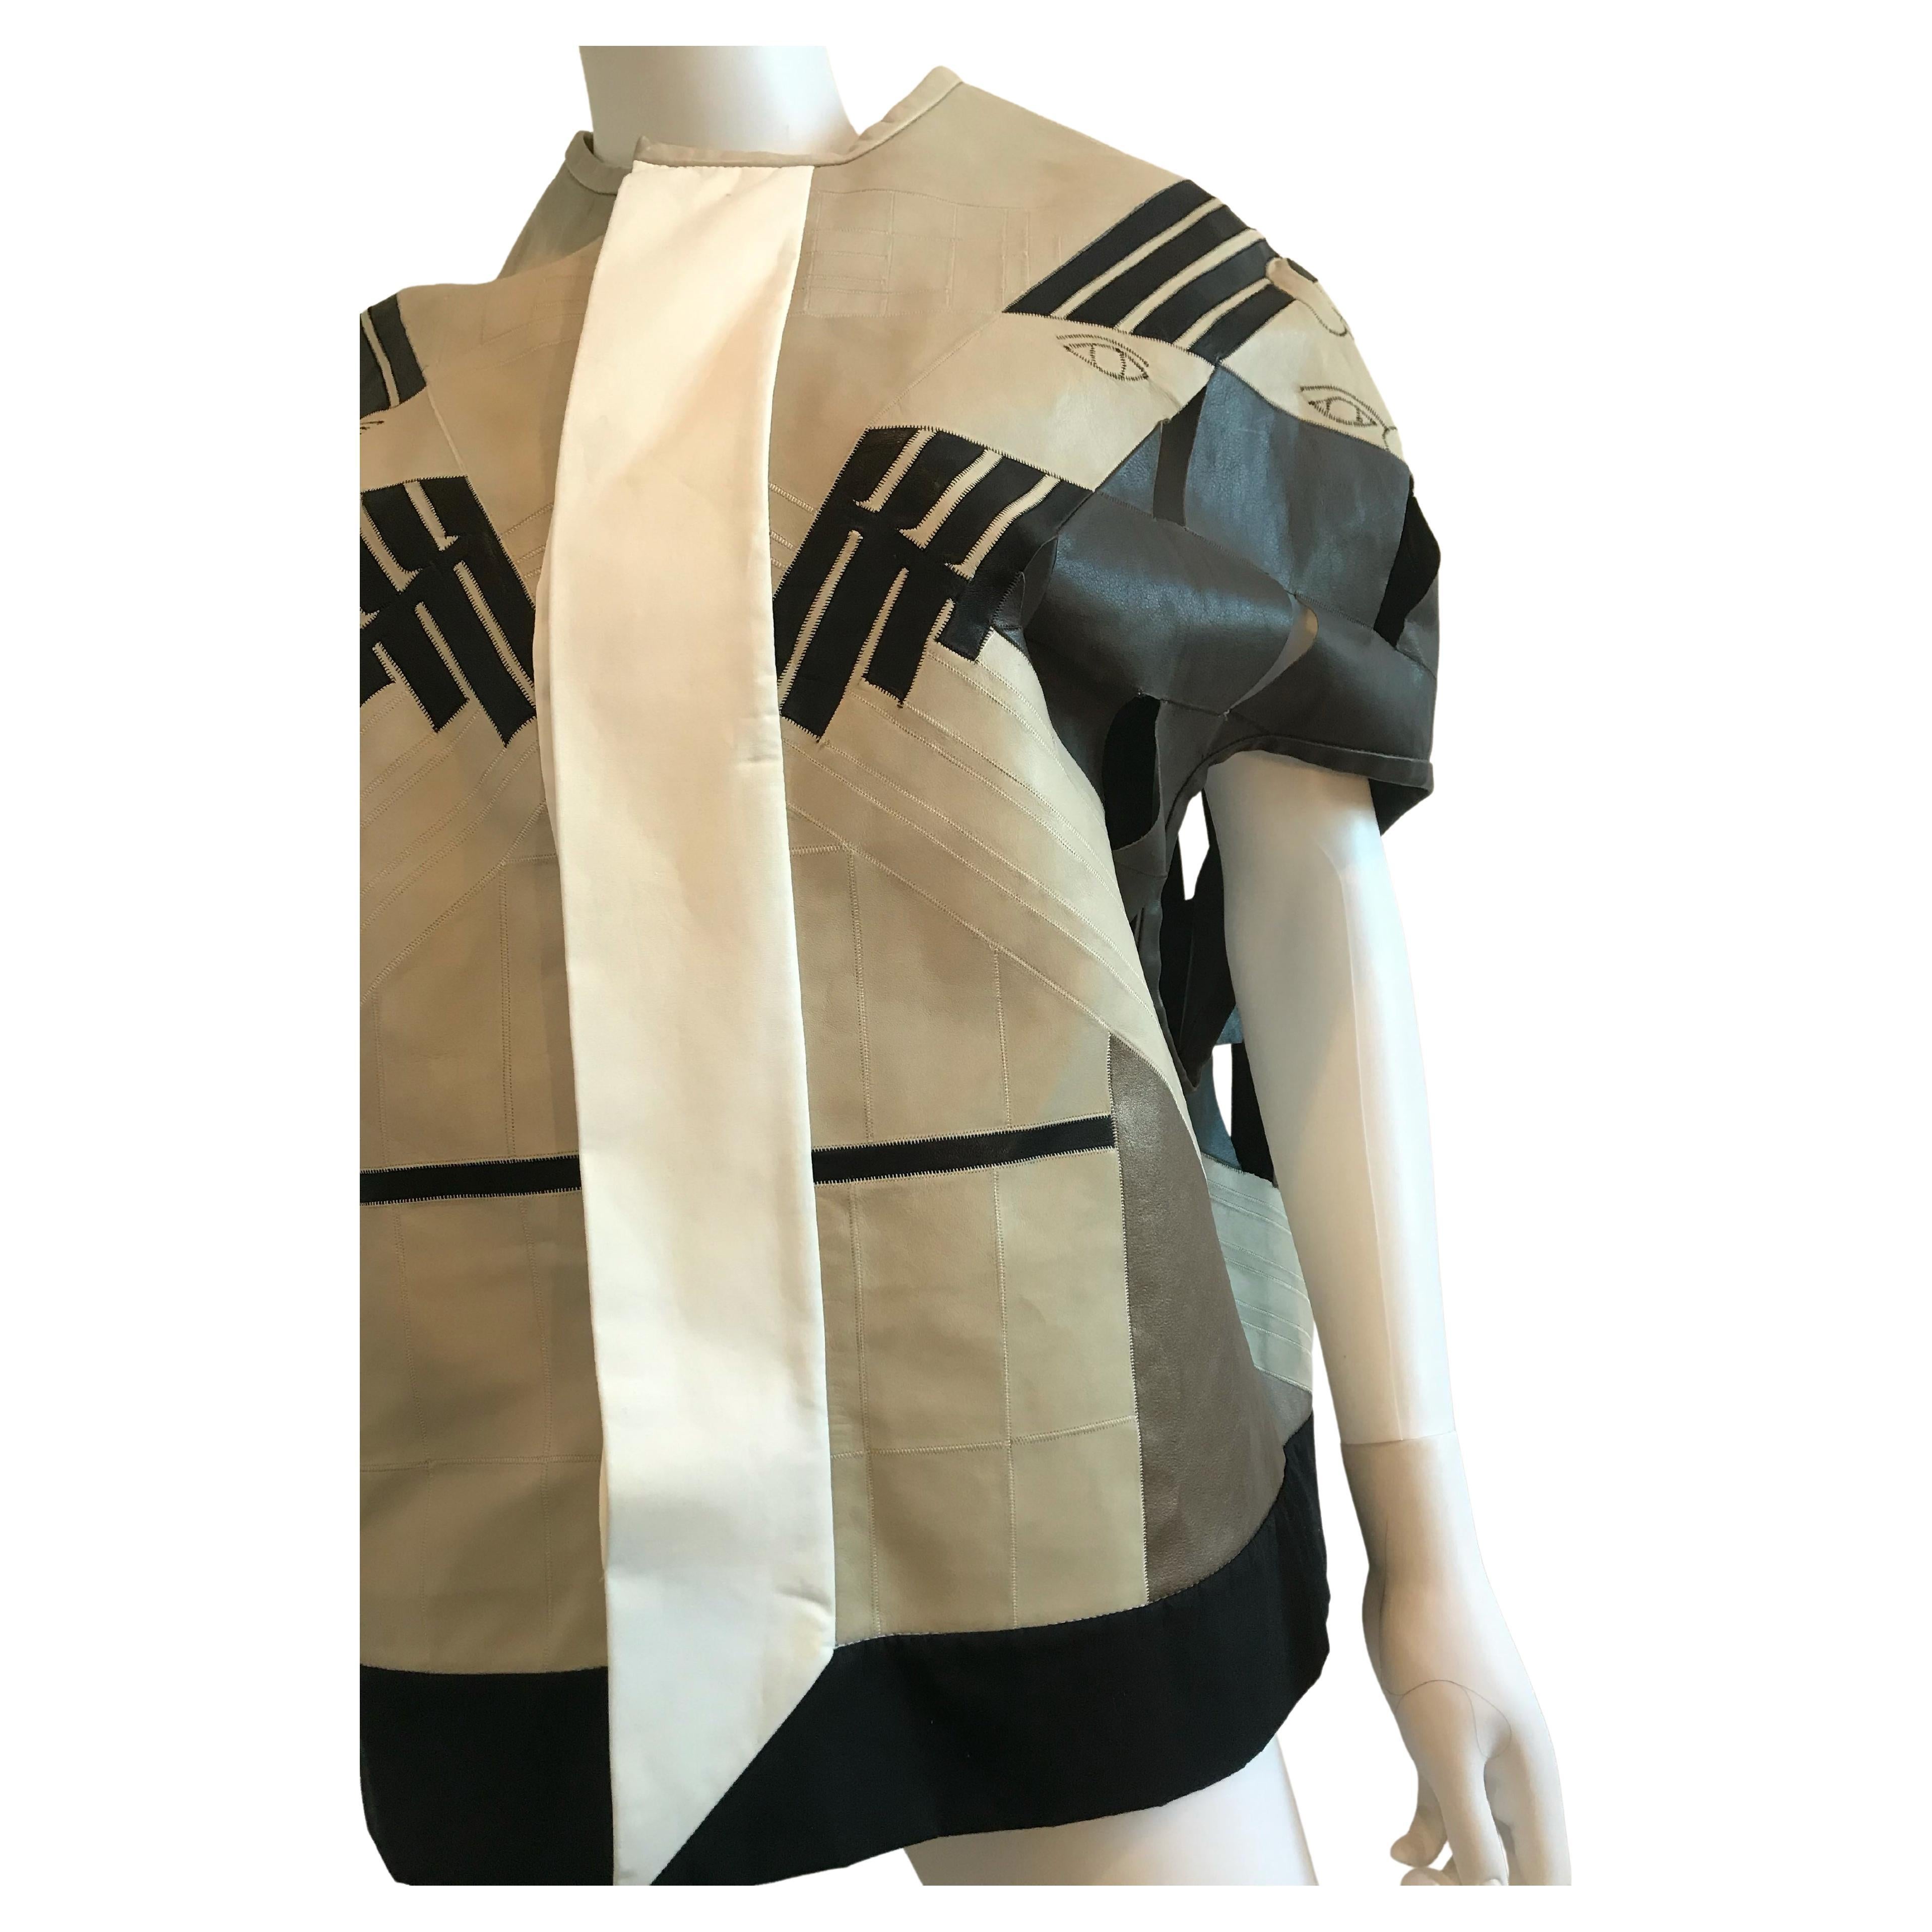 Rick Owens Leather Basket Weave and Eye Detail Embroidered Jacket
Made in Italy
Oversized
Italian 38
Please be mindful that this piece has led a previous life, and may tell its story through minor imperfection. Purchasing this item continues its